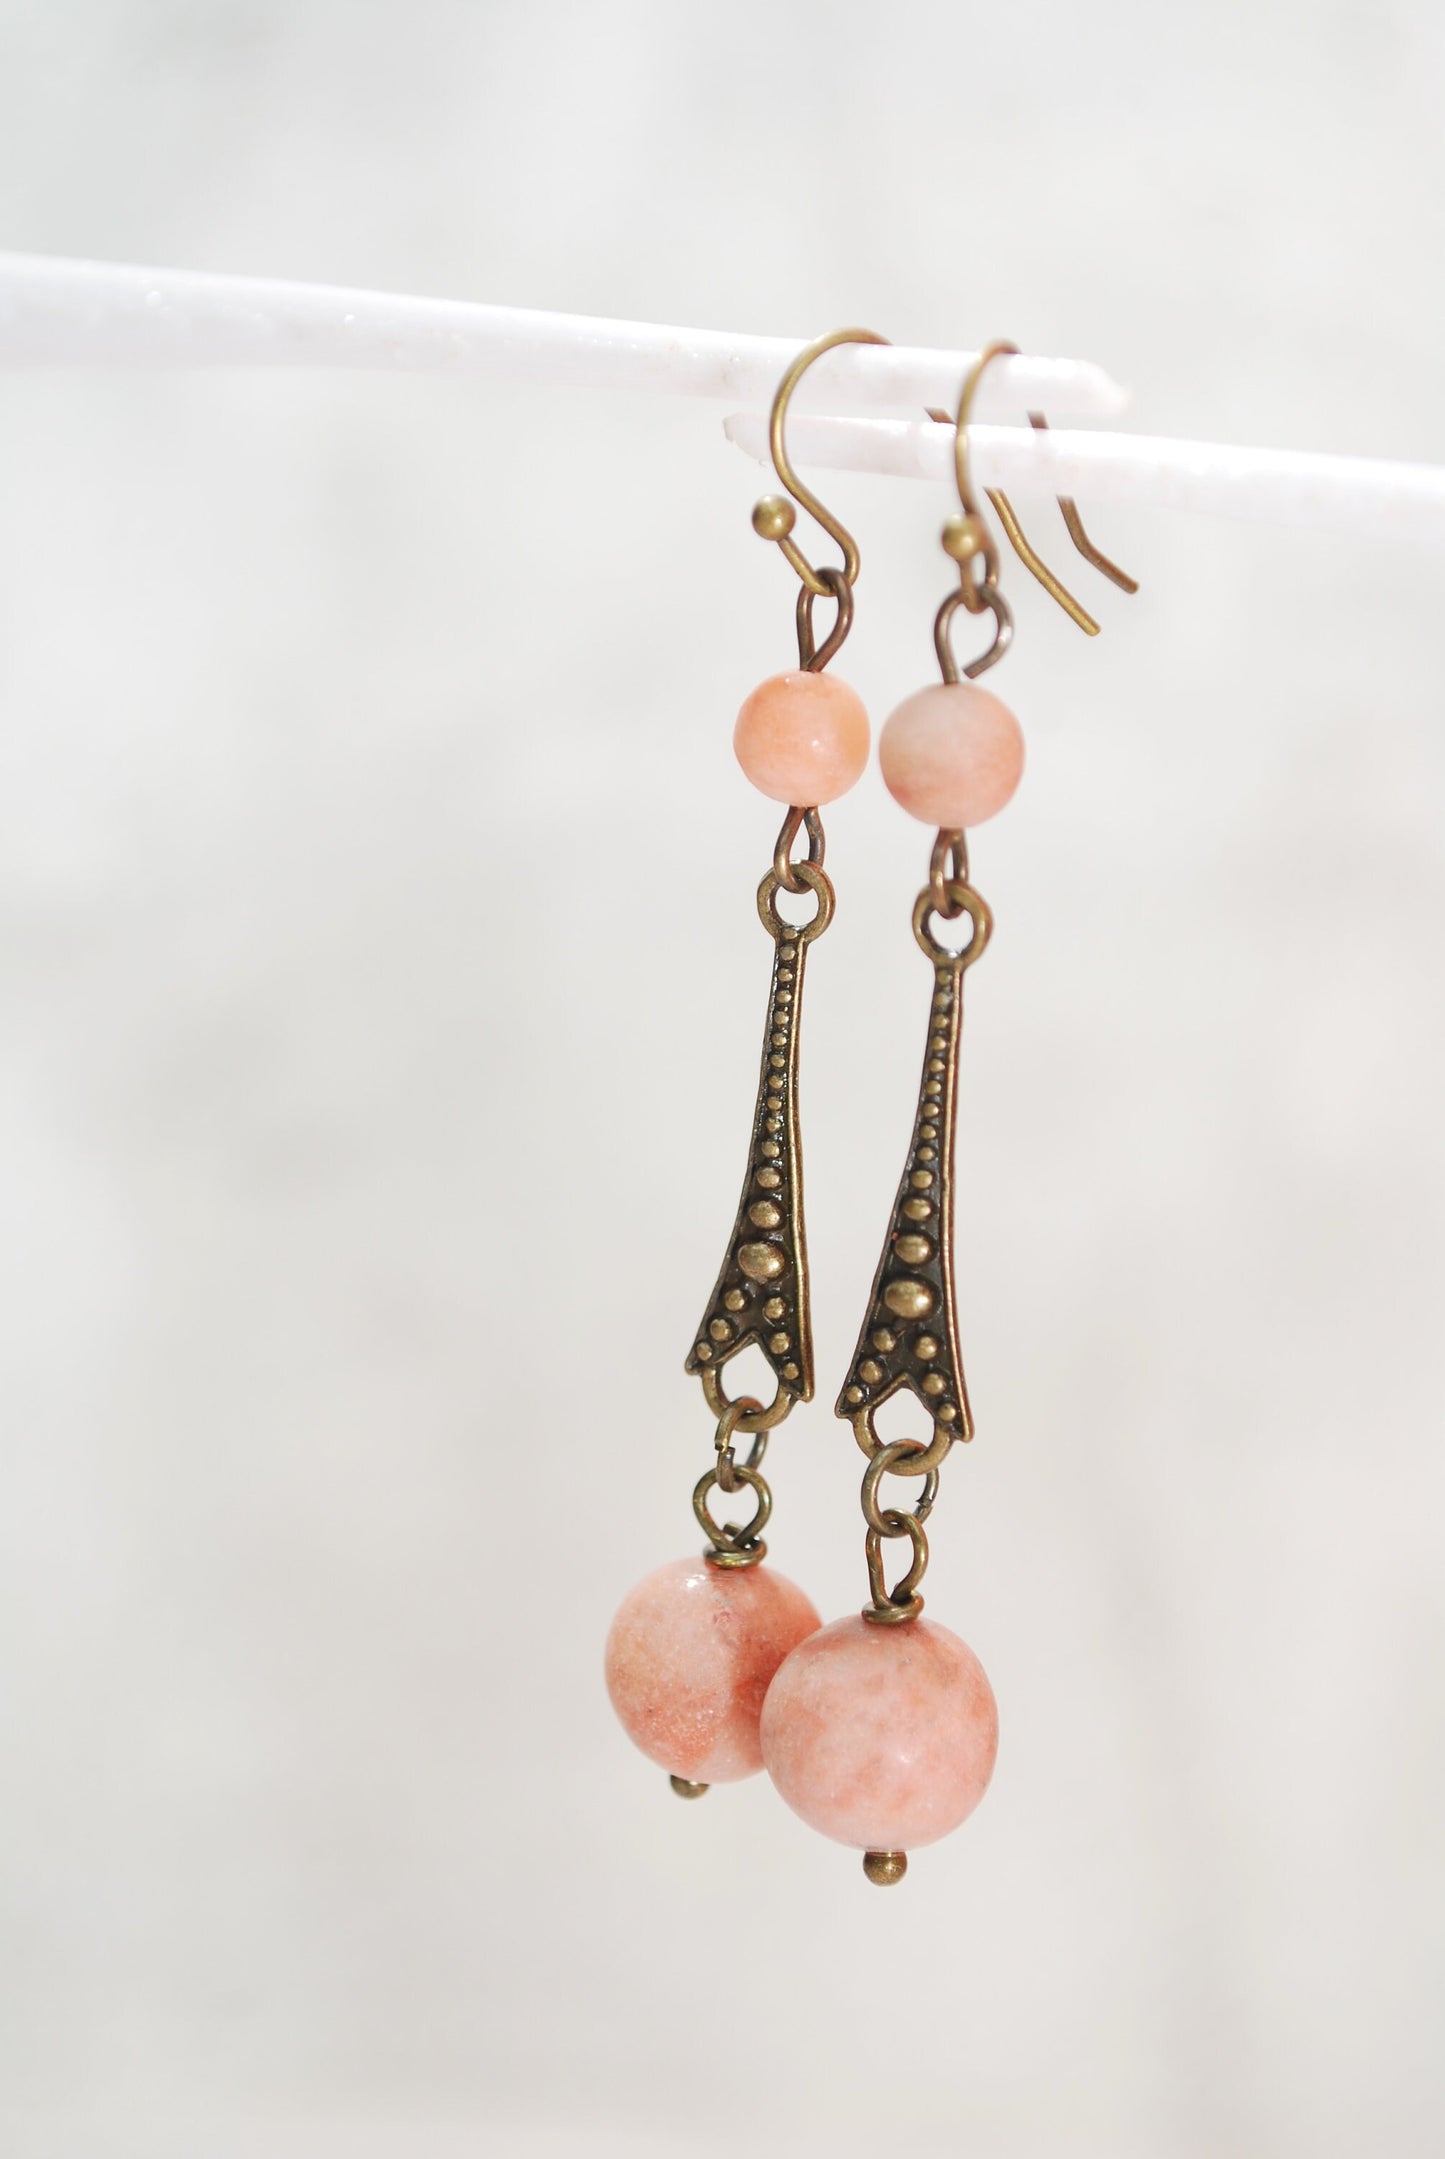 Tribal Boho Aventurine Teardrop Earrings: Handcrafted Statement Pieces for Bohemian Chic and Everyday Style, Estibela design,  6cm - 2.5"